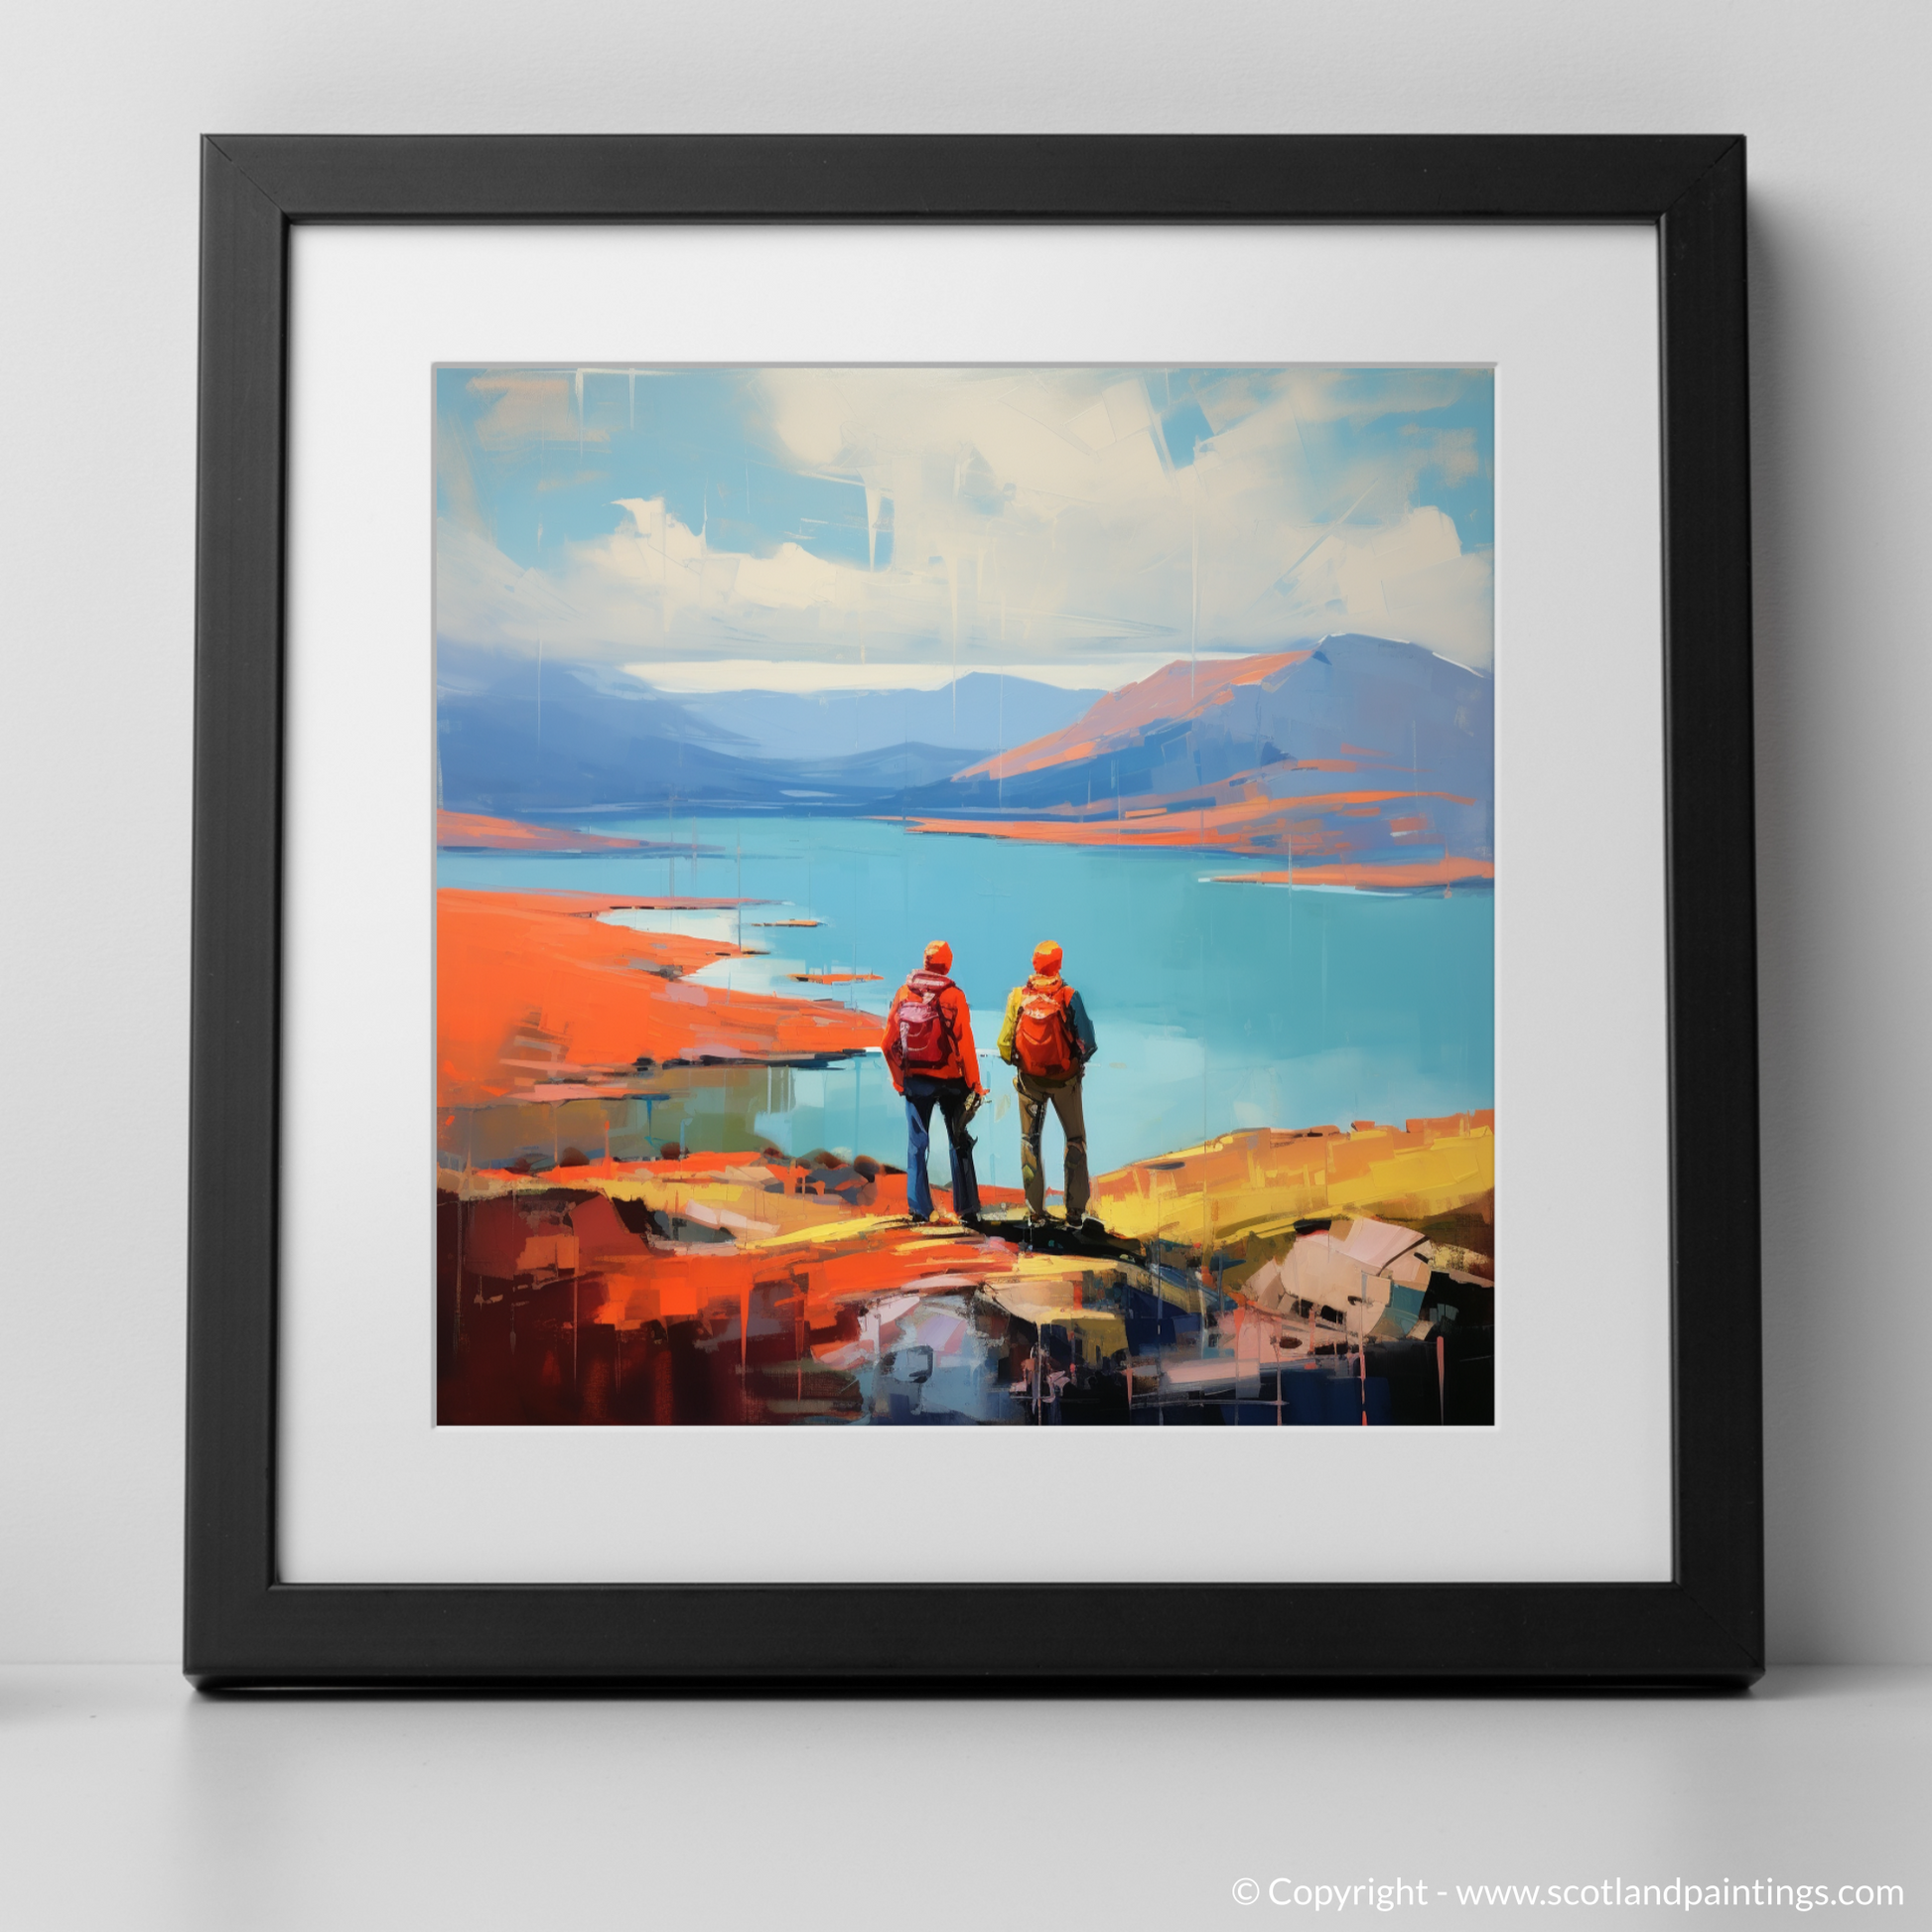 Art Print of Two hikers looking out on Loch Lomond with a black frame